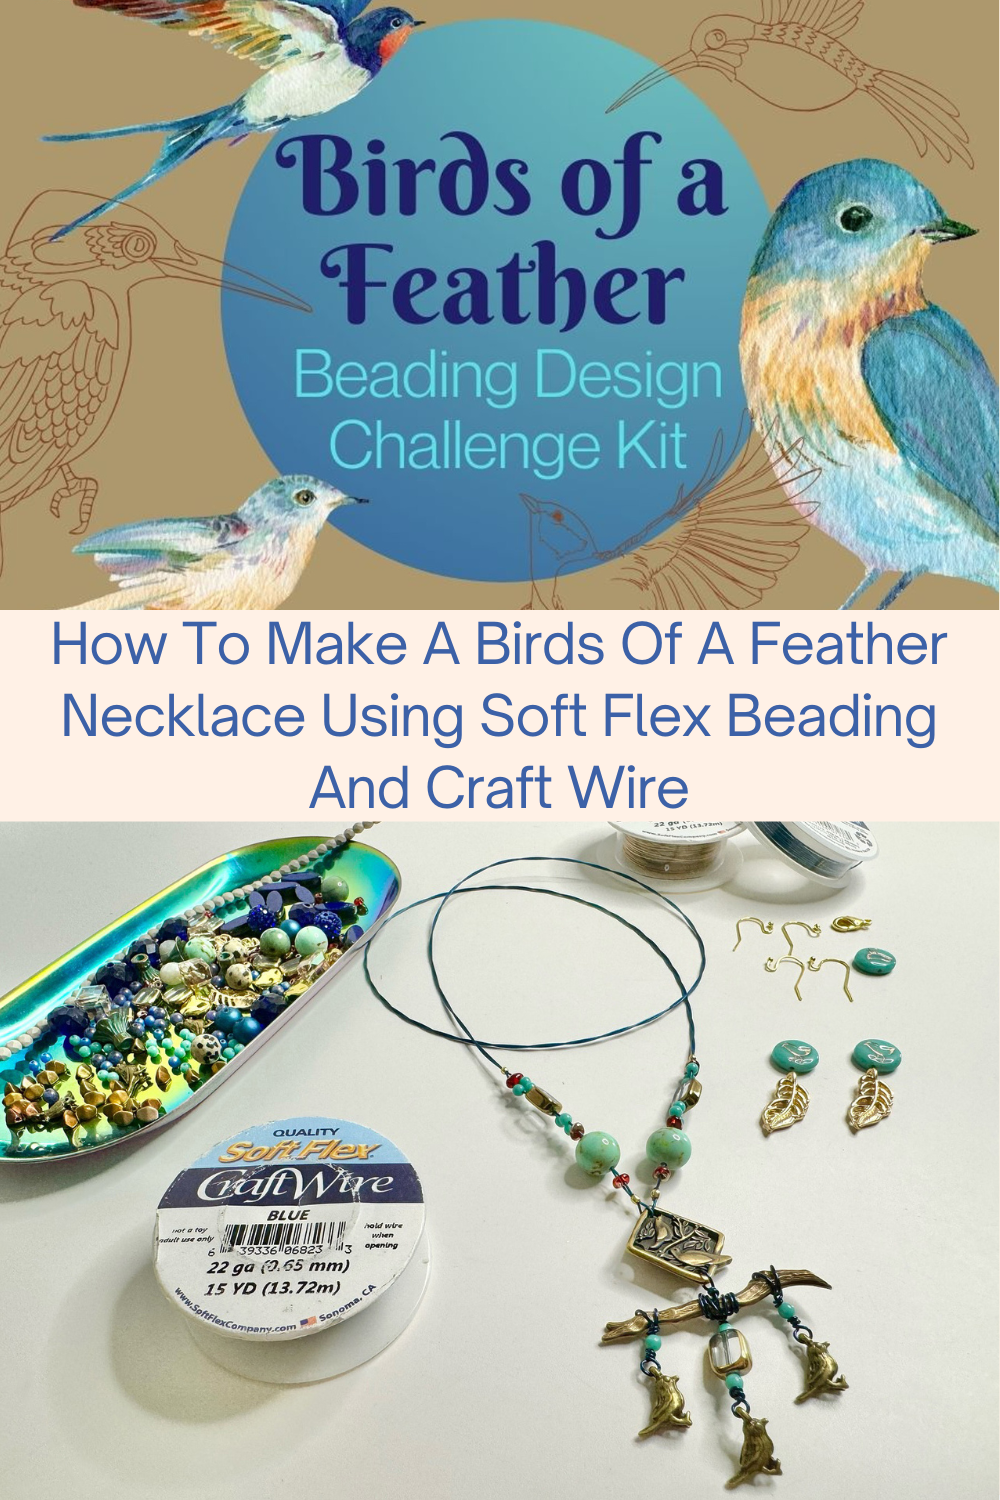 How To Make A Birds Of A Feather Necklace Using Soft Flex Beading And Craft Wire Collage